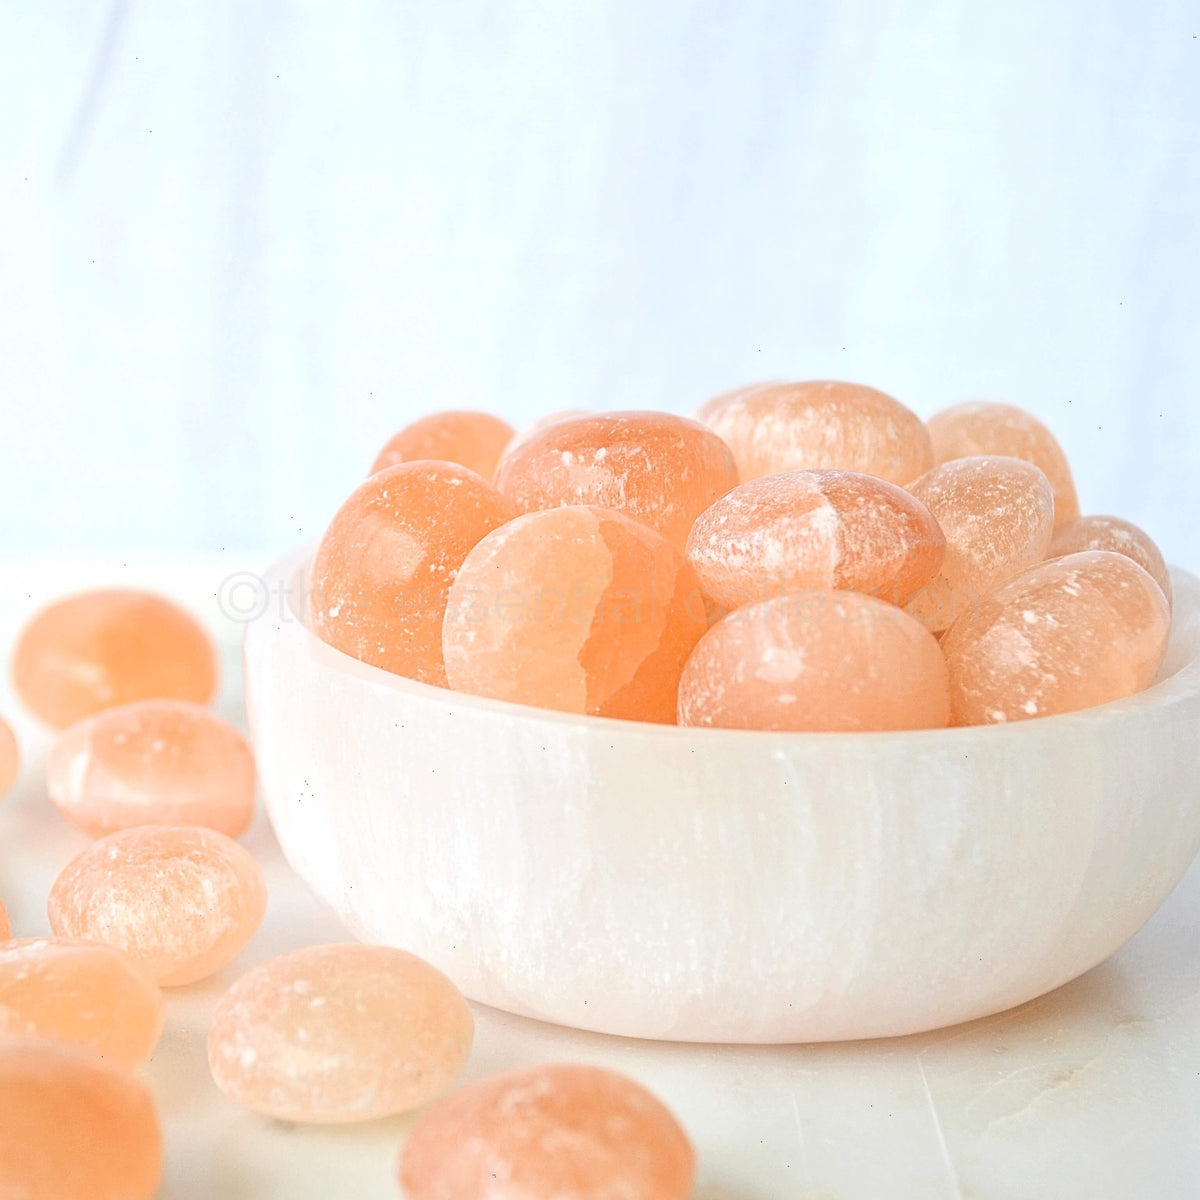 orange selenite tumbled crystals in bowl with white background